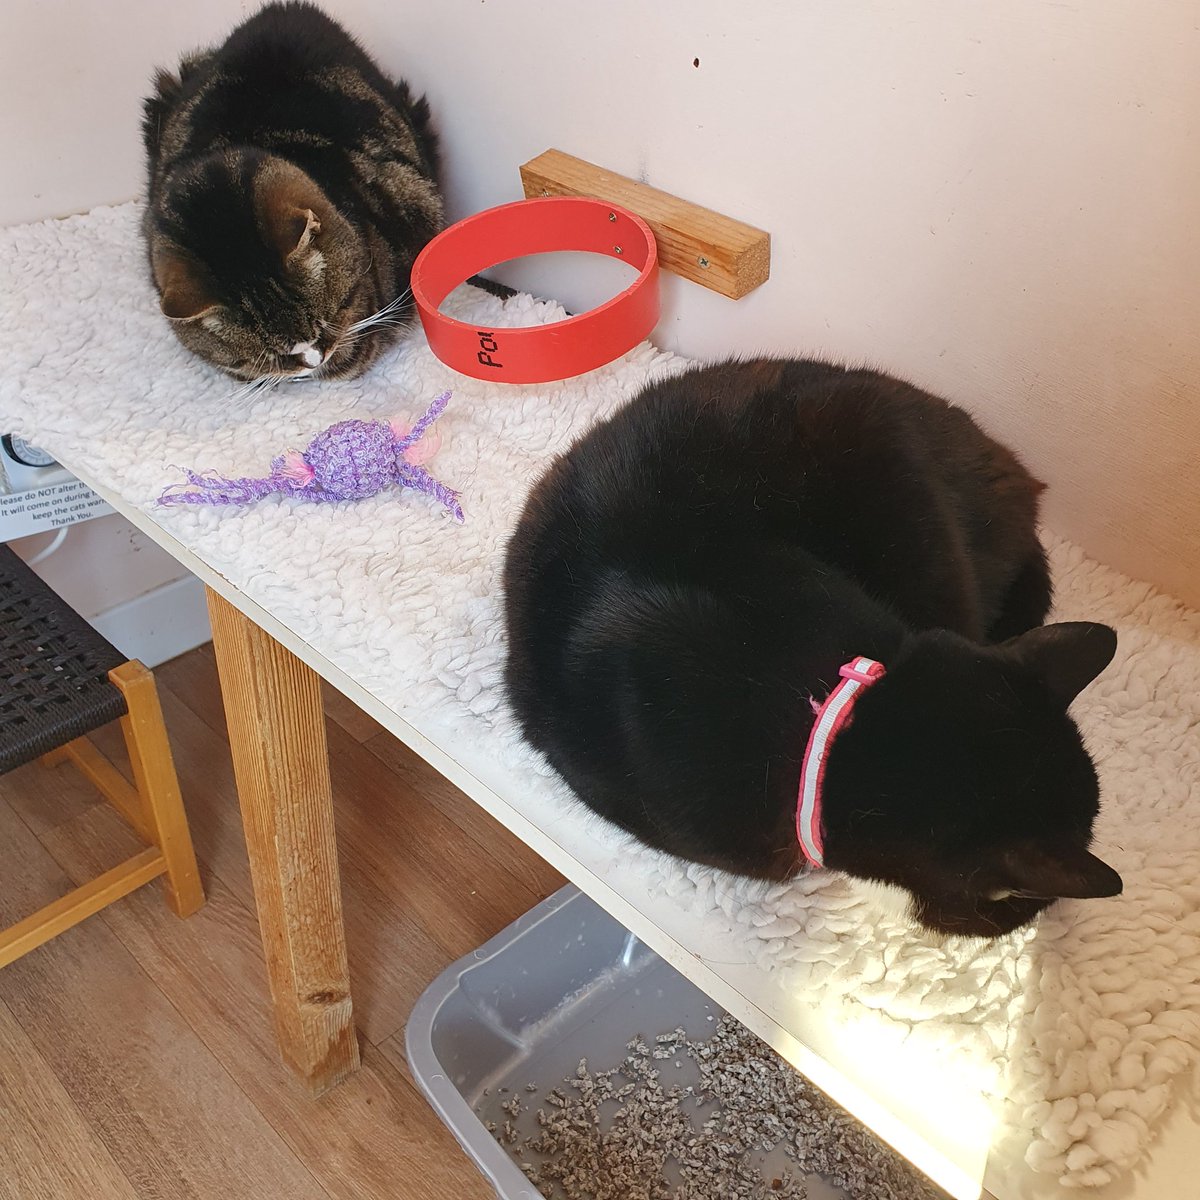 #CharityTuesday ~ Lucky & Lucy enjoying a snooze in their favourite cottage. The Retirement Village can be sponsored for £60 per year. An ideal #xmasgift for a #catlover Contact Sam sponsorship@shropshirecatrescue.org.uk or shropshirecatrescue.org.uk/sponsor-a-cat
#catcharity #inthecompanyofcats